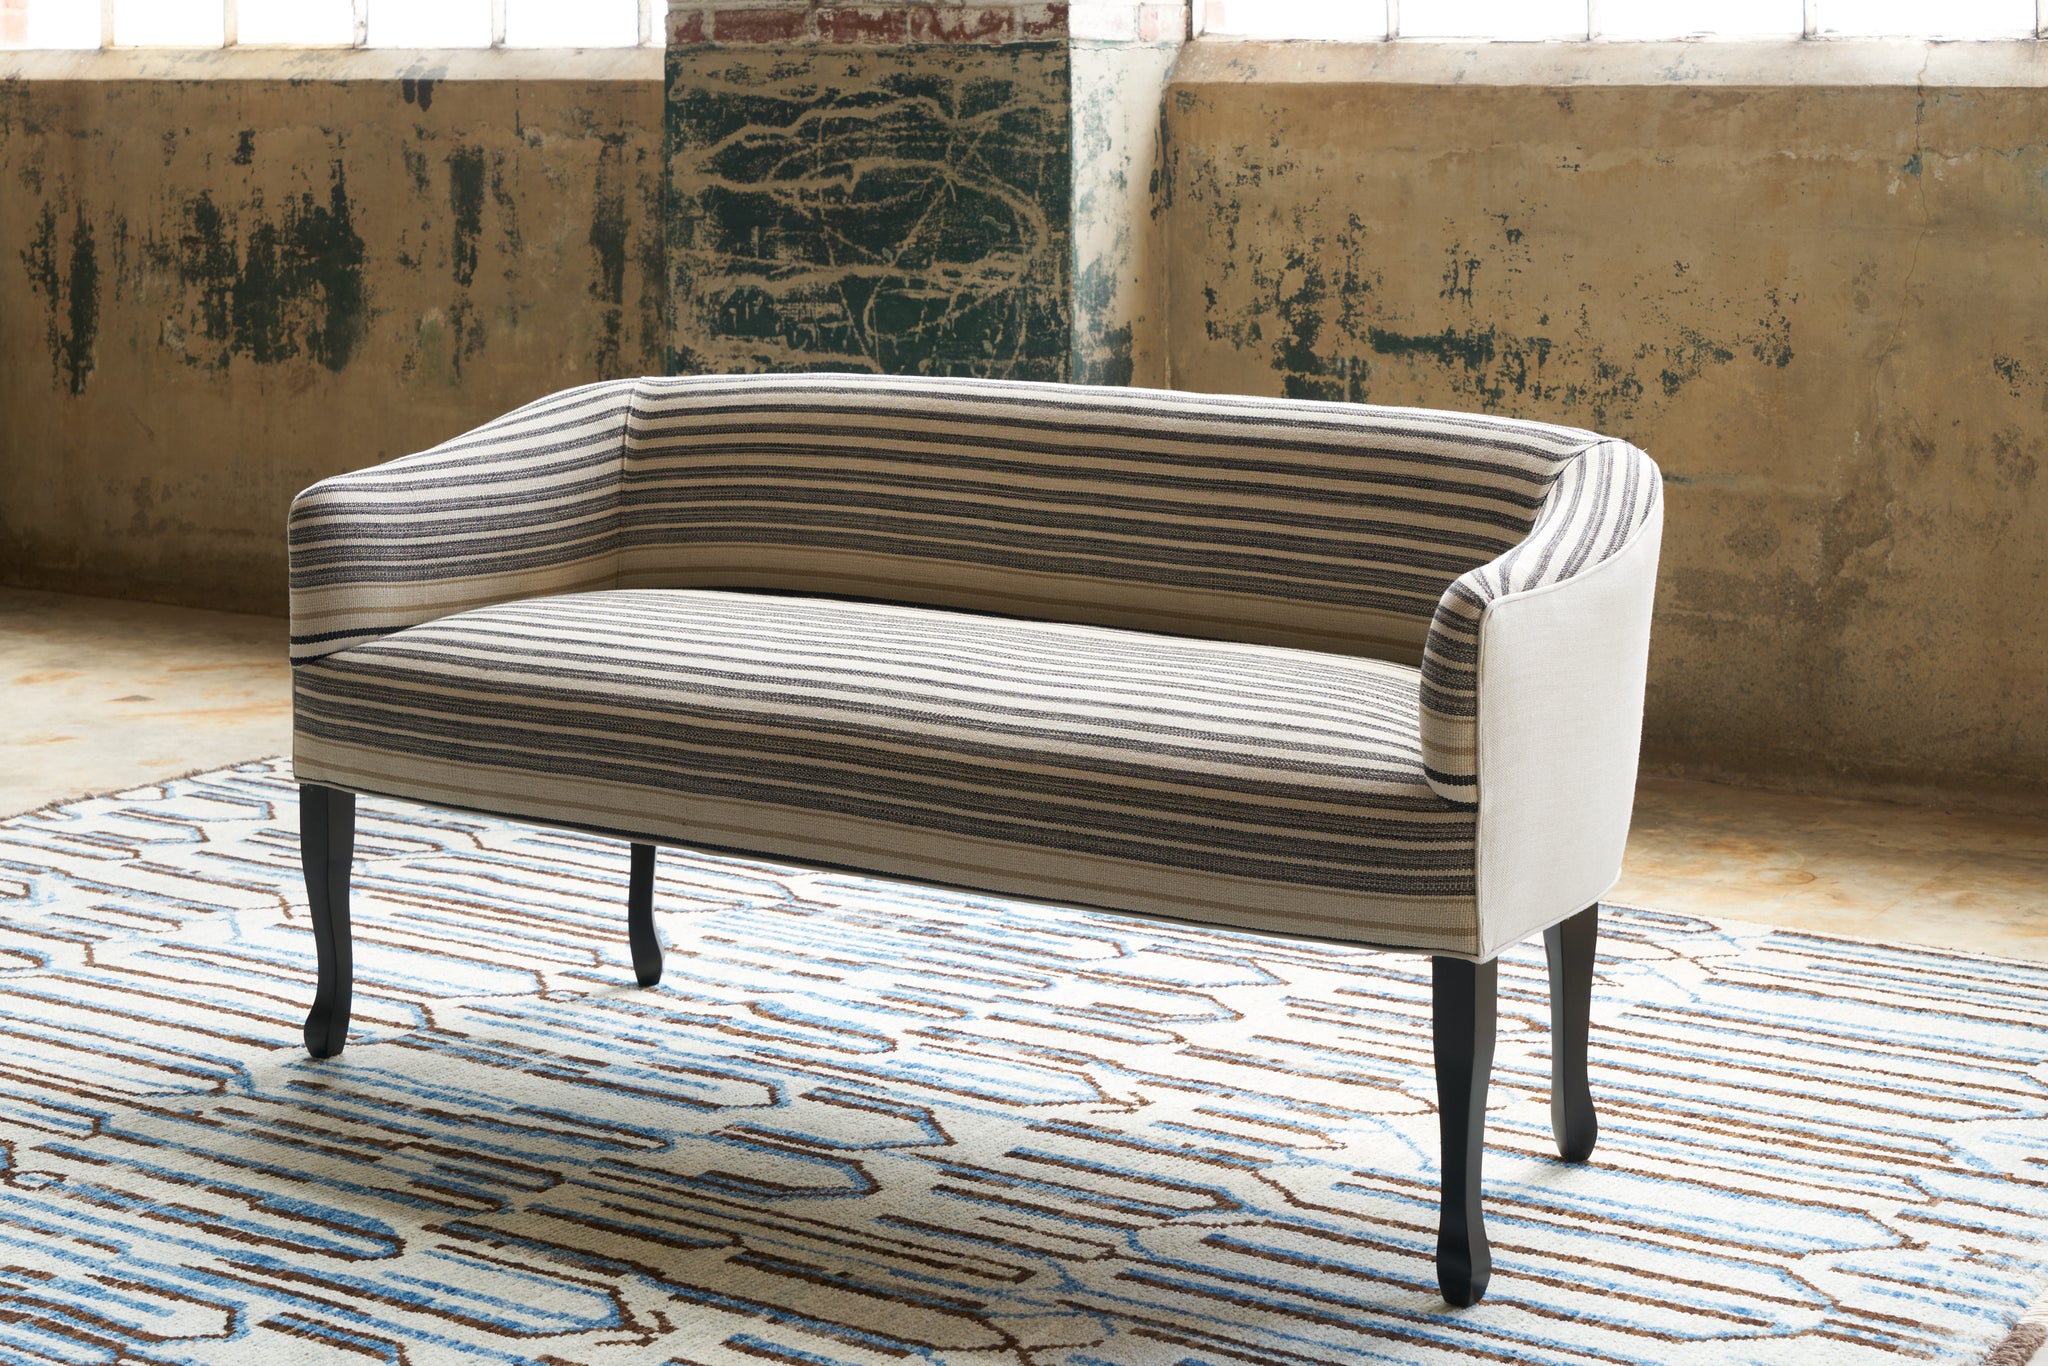  Striped settee on a blue rug with geometric designs. Photographed in Rayas Fino  